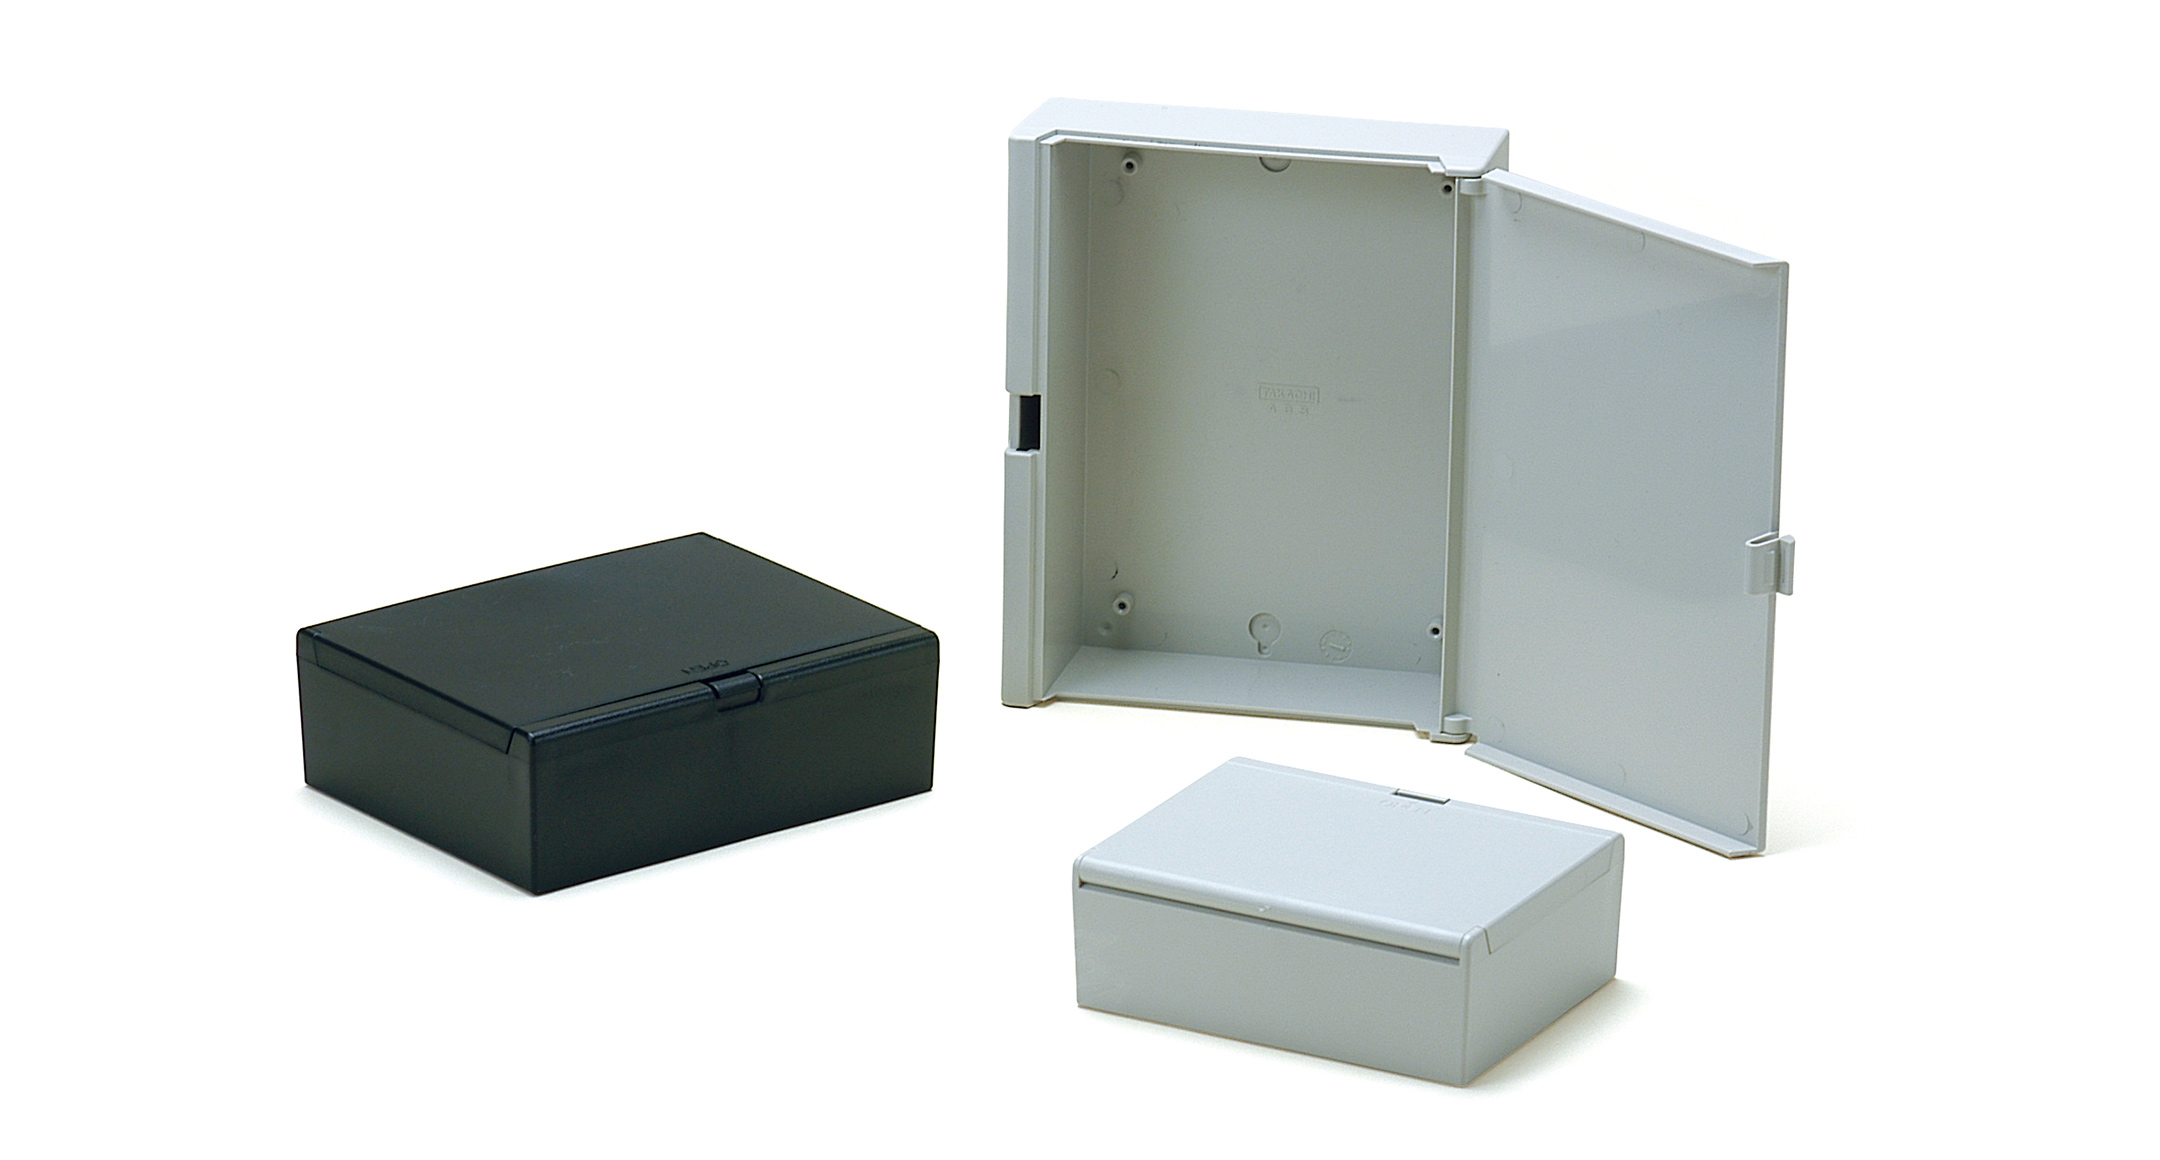 PLASTIC BOX with HINGED COVER - OP series